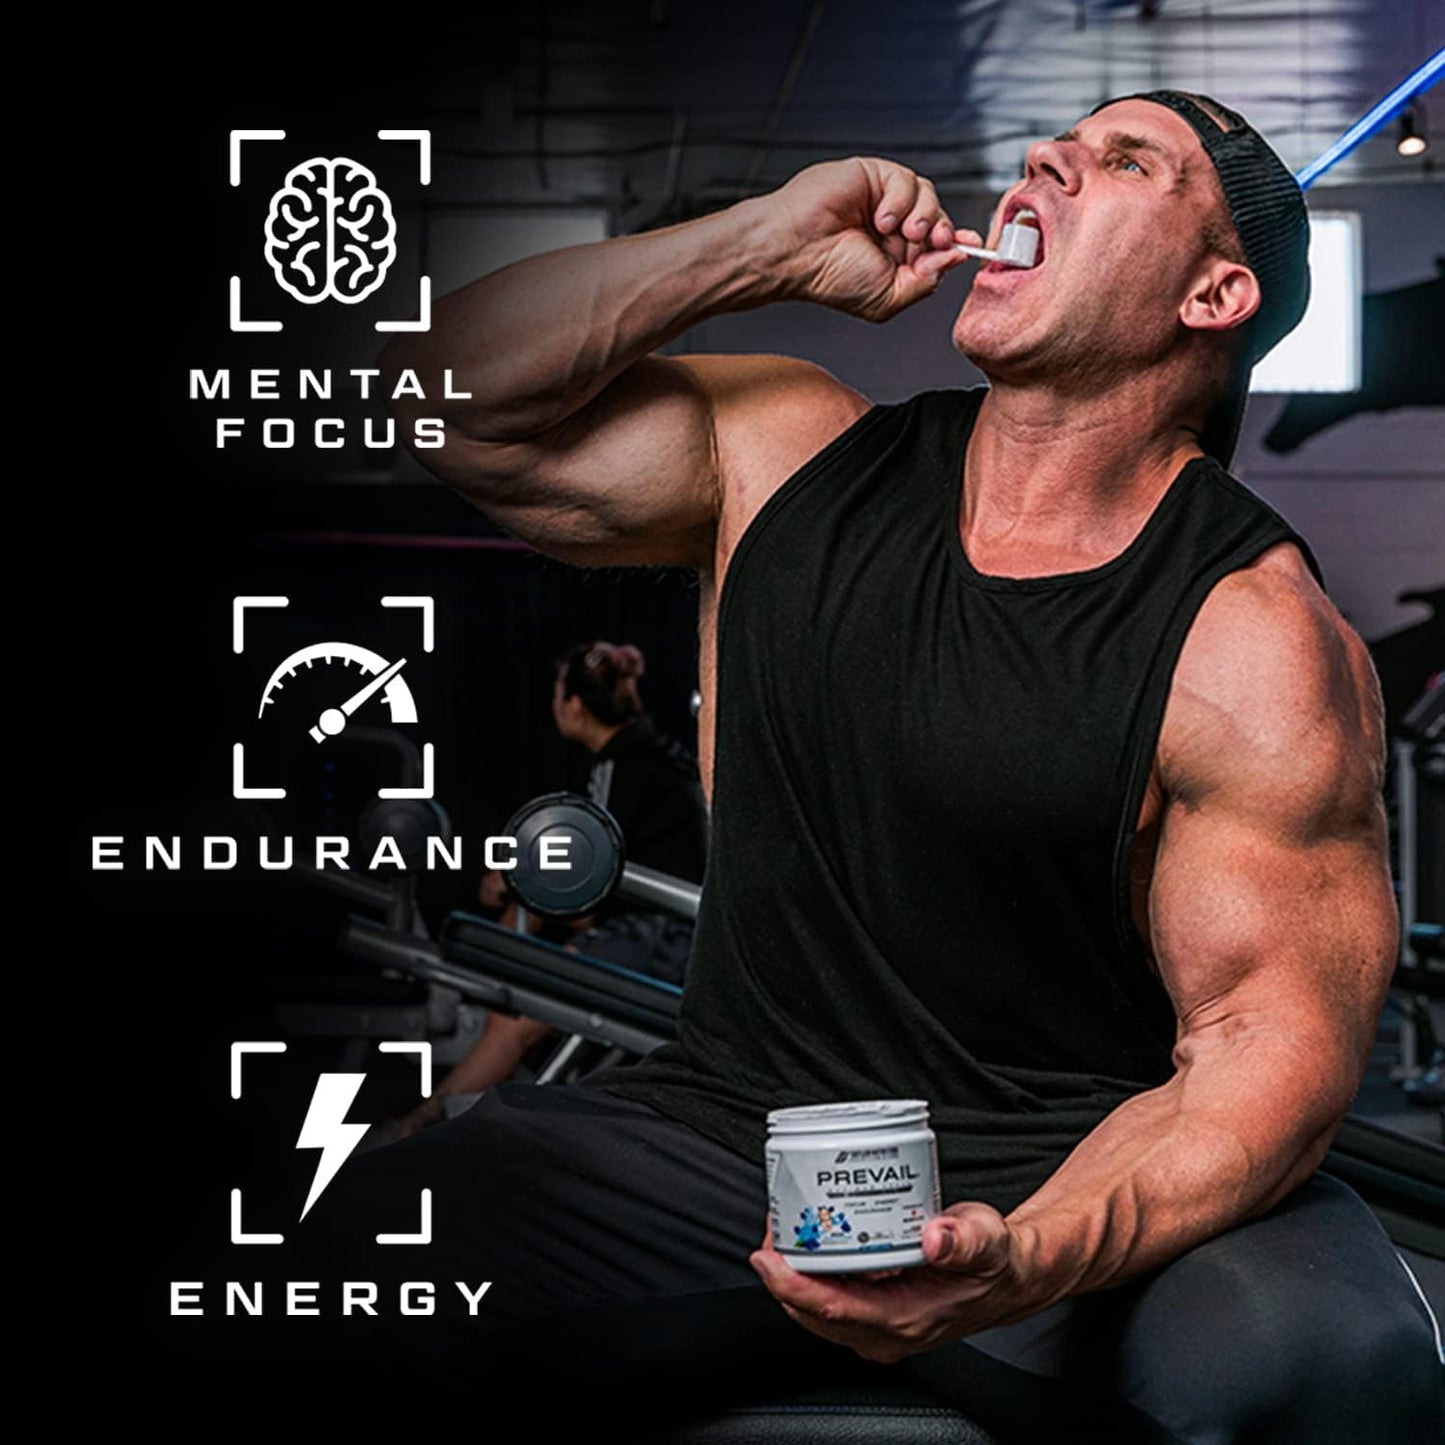 Prevail Pre Workout Powder with Nootropics: Pre-Workout Drink for Men and Women, Cutting Edge Energy and Focus Supplement with L Citrulline, Alpha GPC, L Tyrosine | Sour Rainbow Candy, 40 Scoops